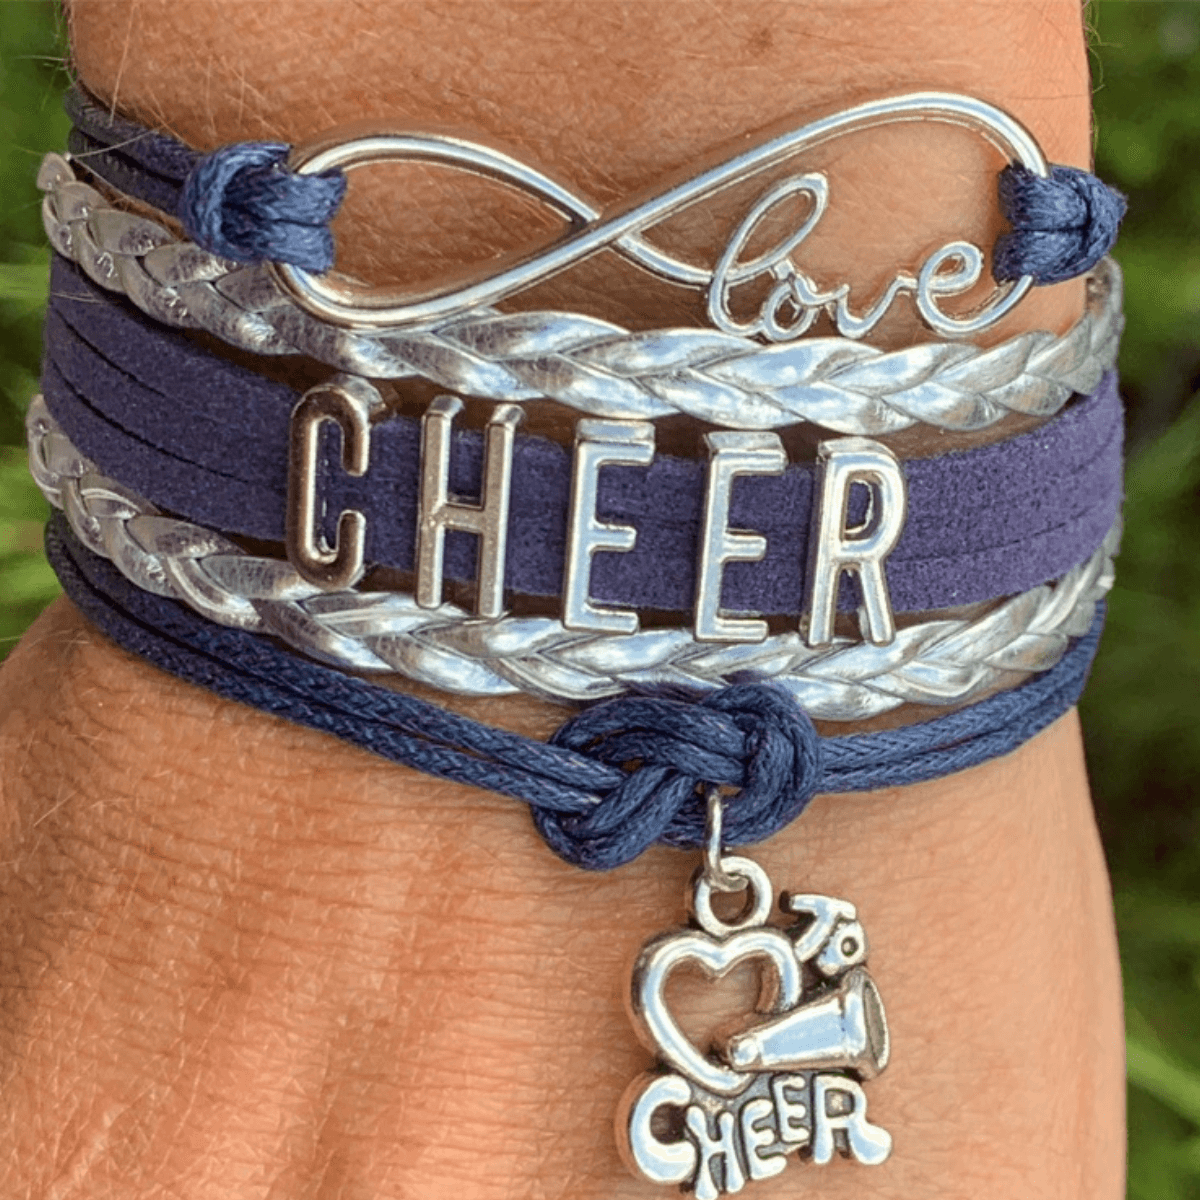 Love to Cheer Bracelet - Blue and Silver Color